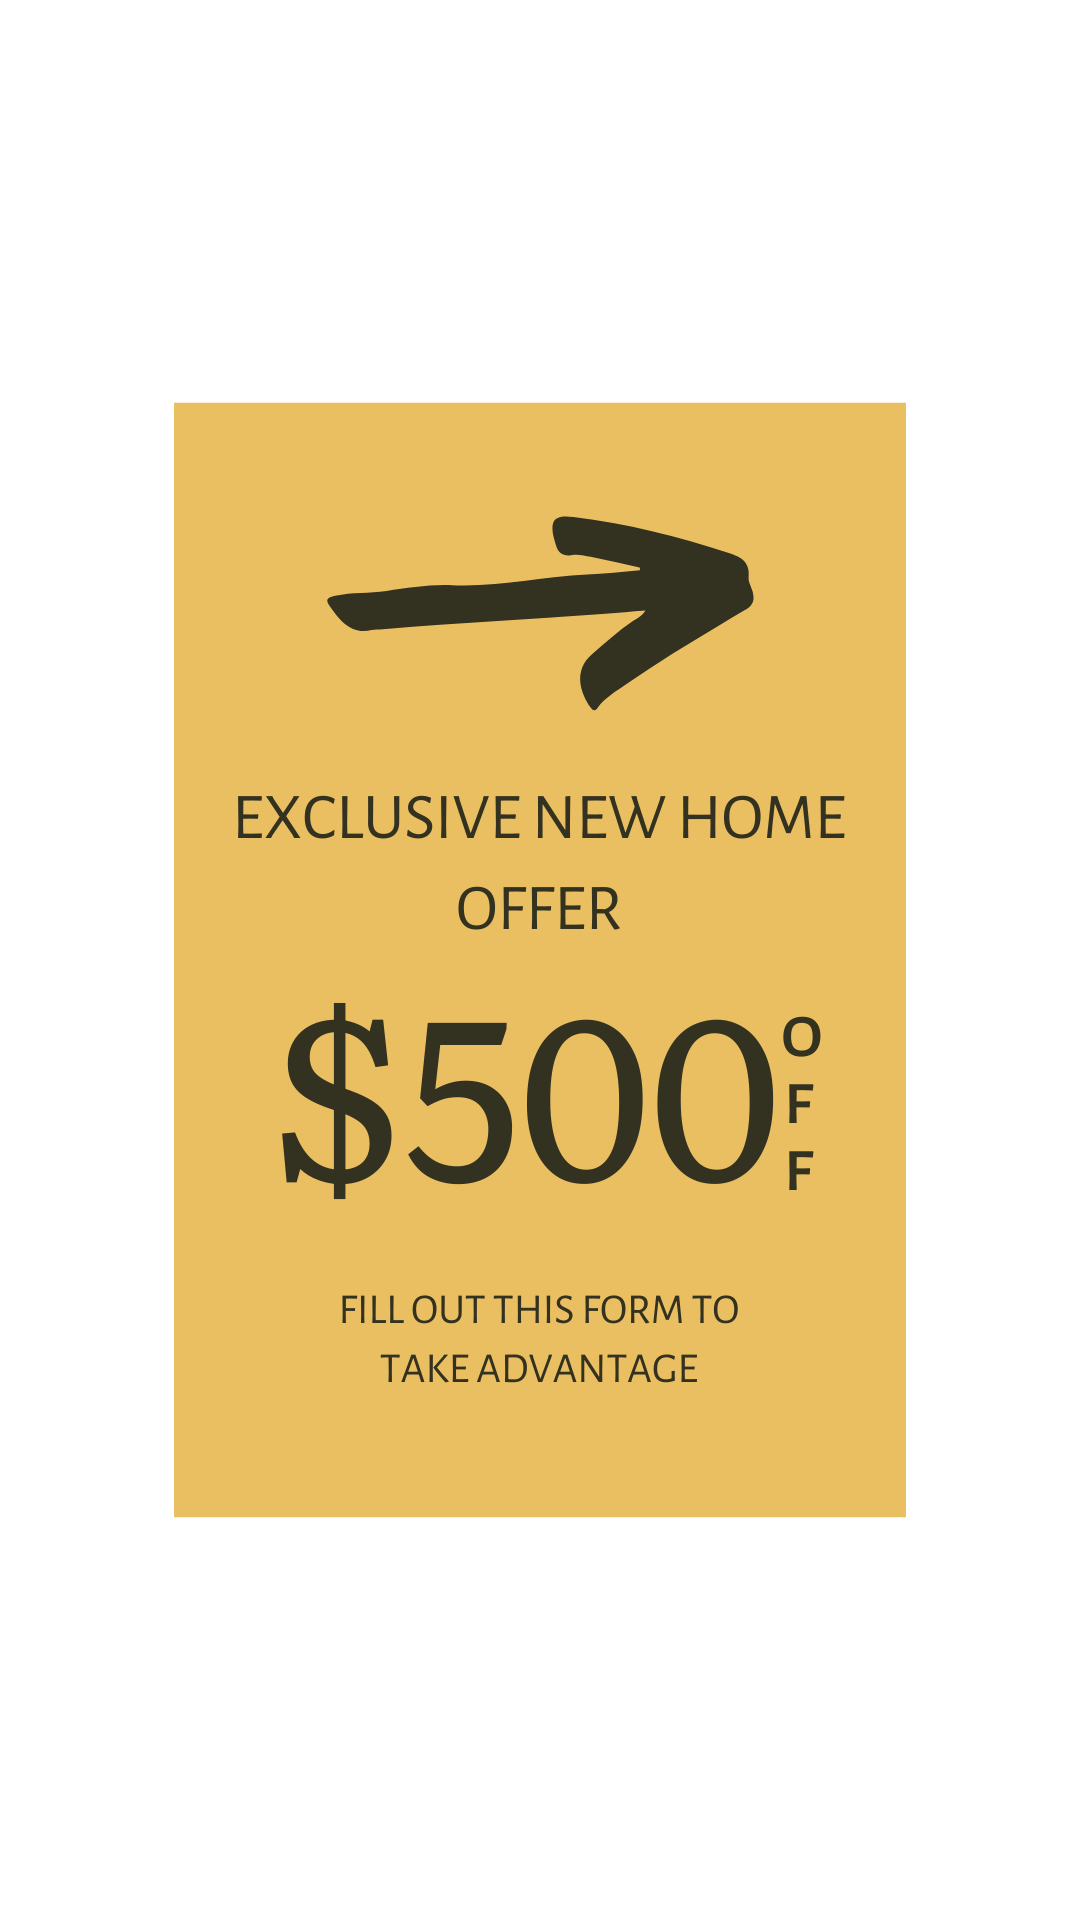 NEW HOME OFFER